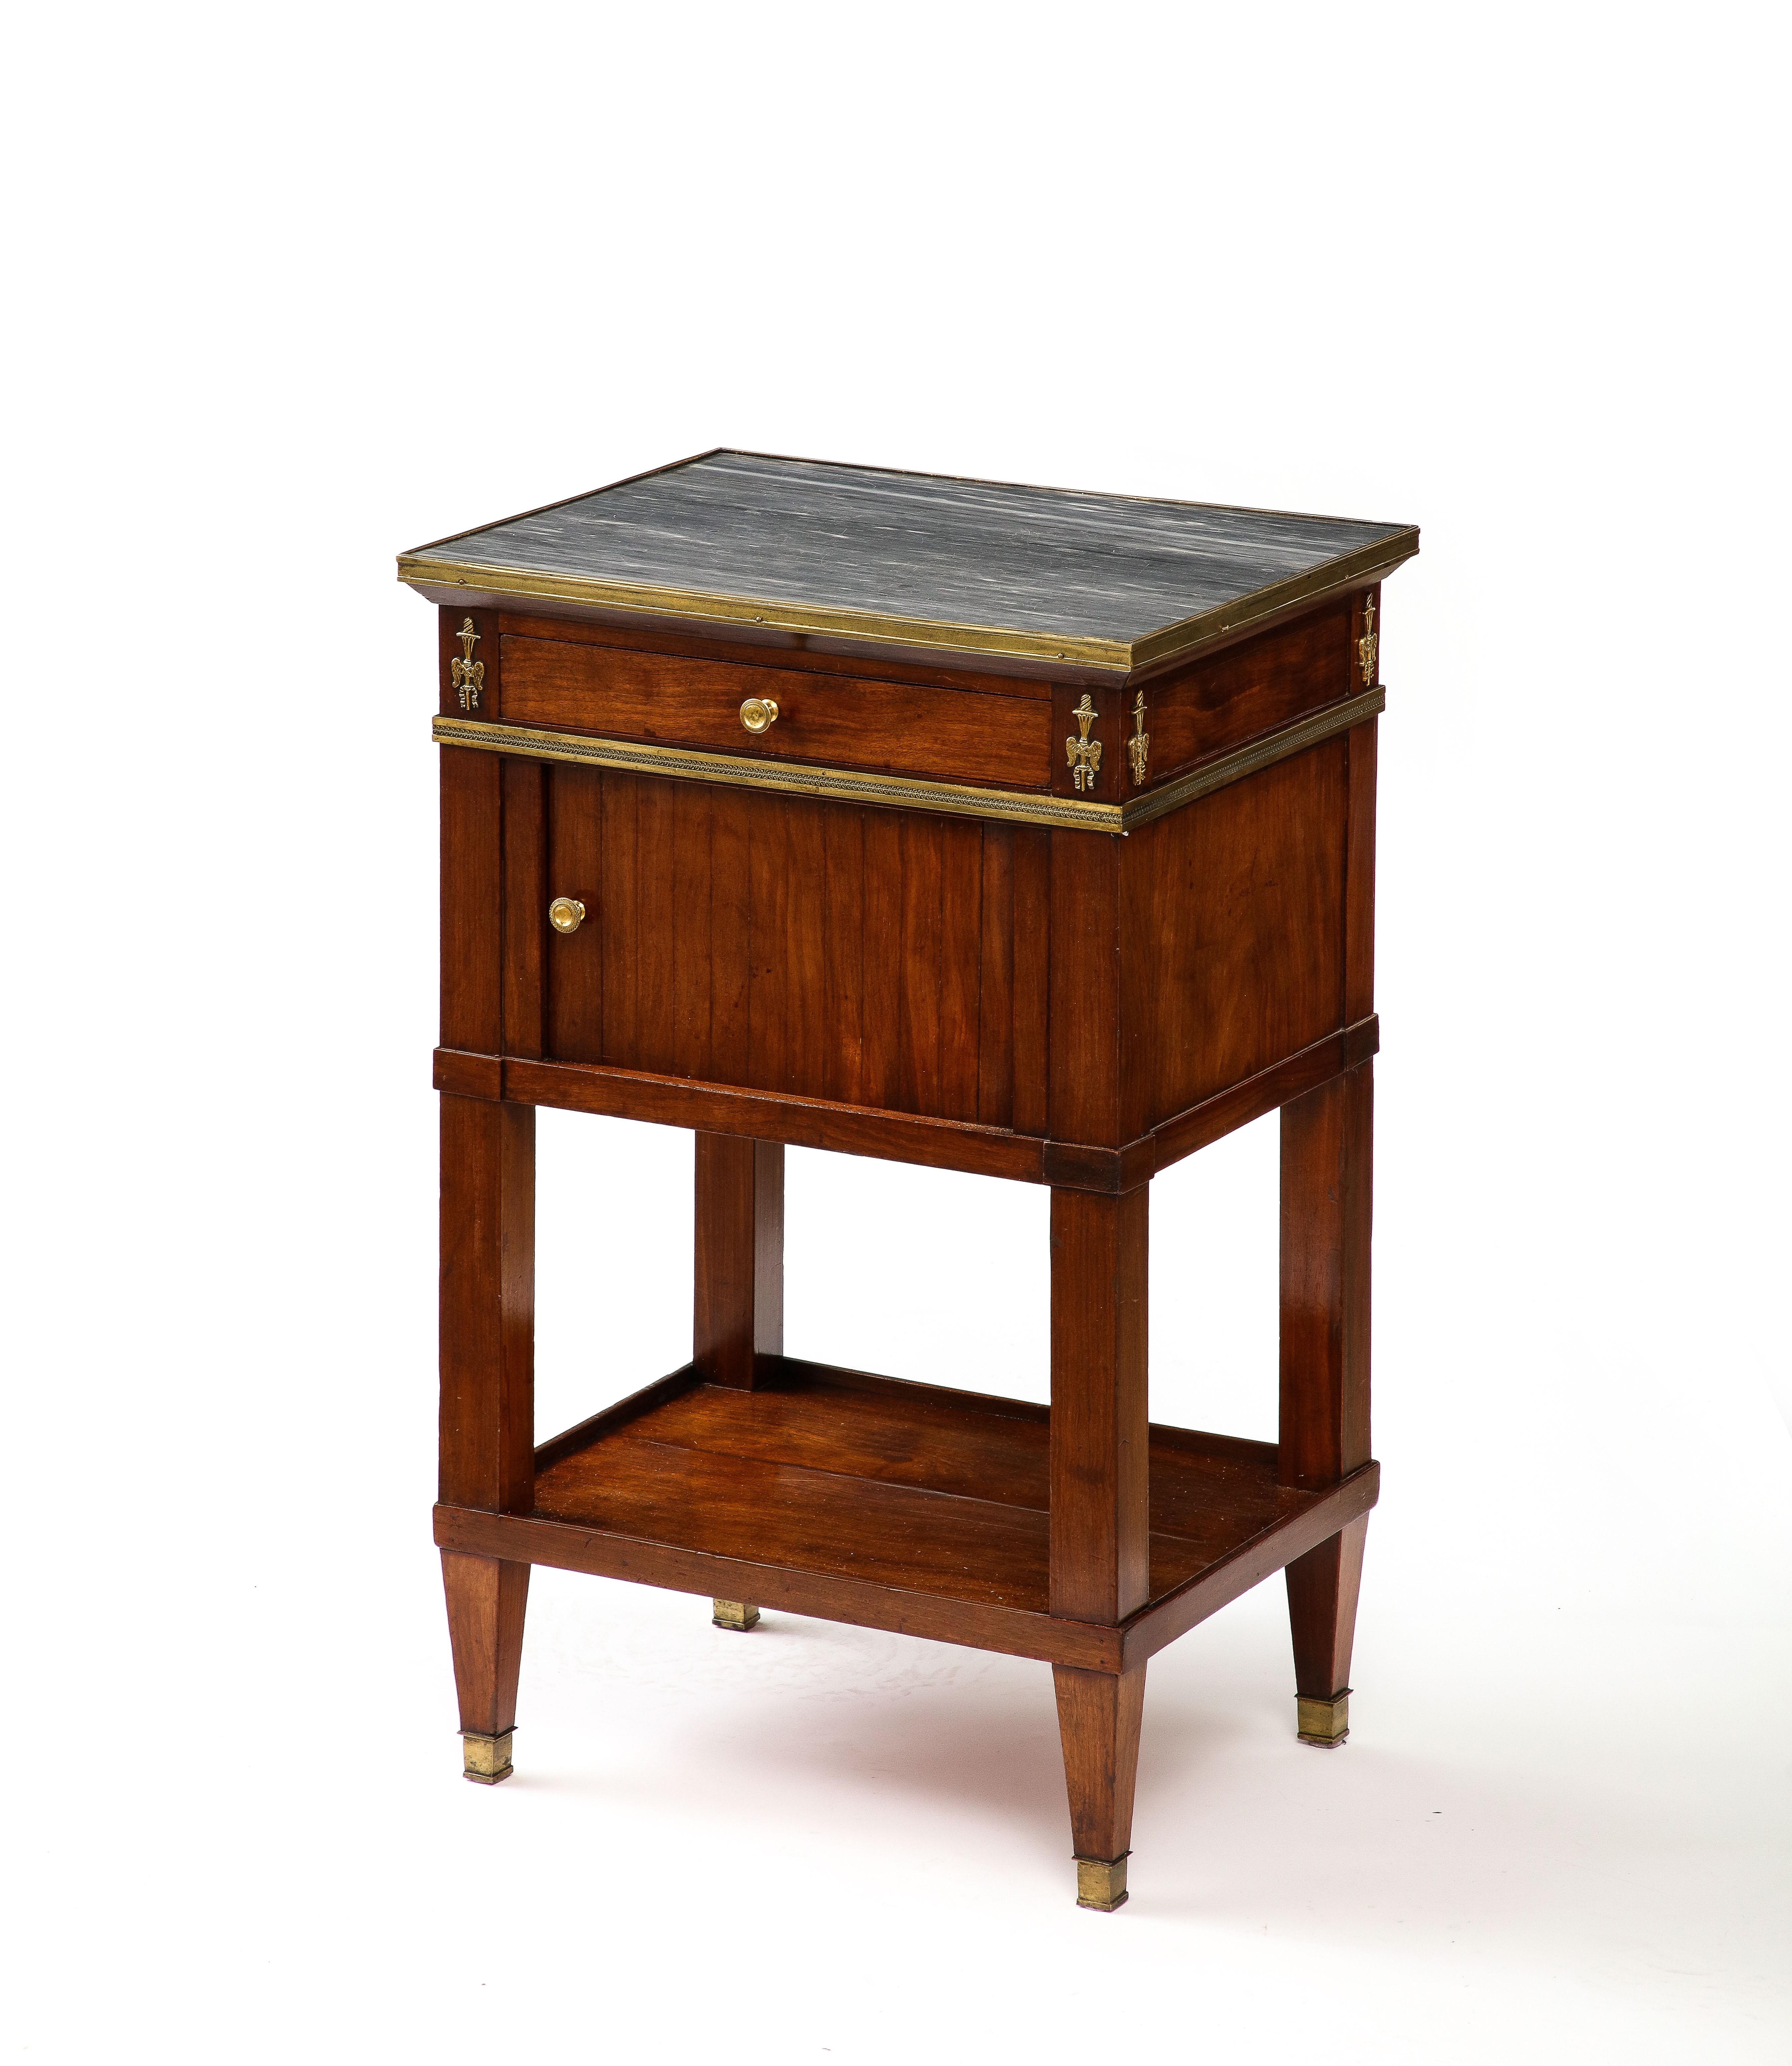 Stately mahogany nightstand with a tambour door, and brass and marble detailing.